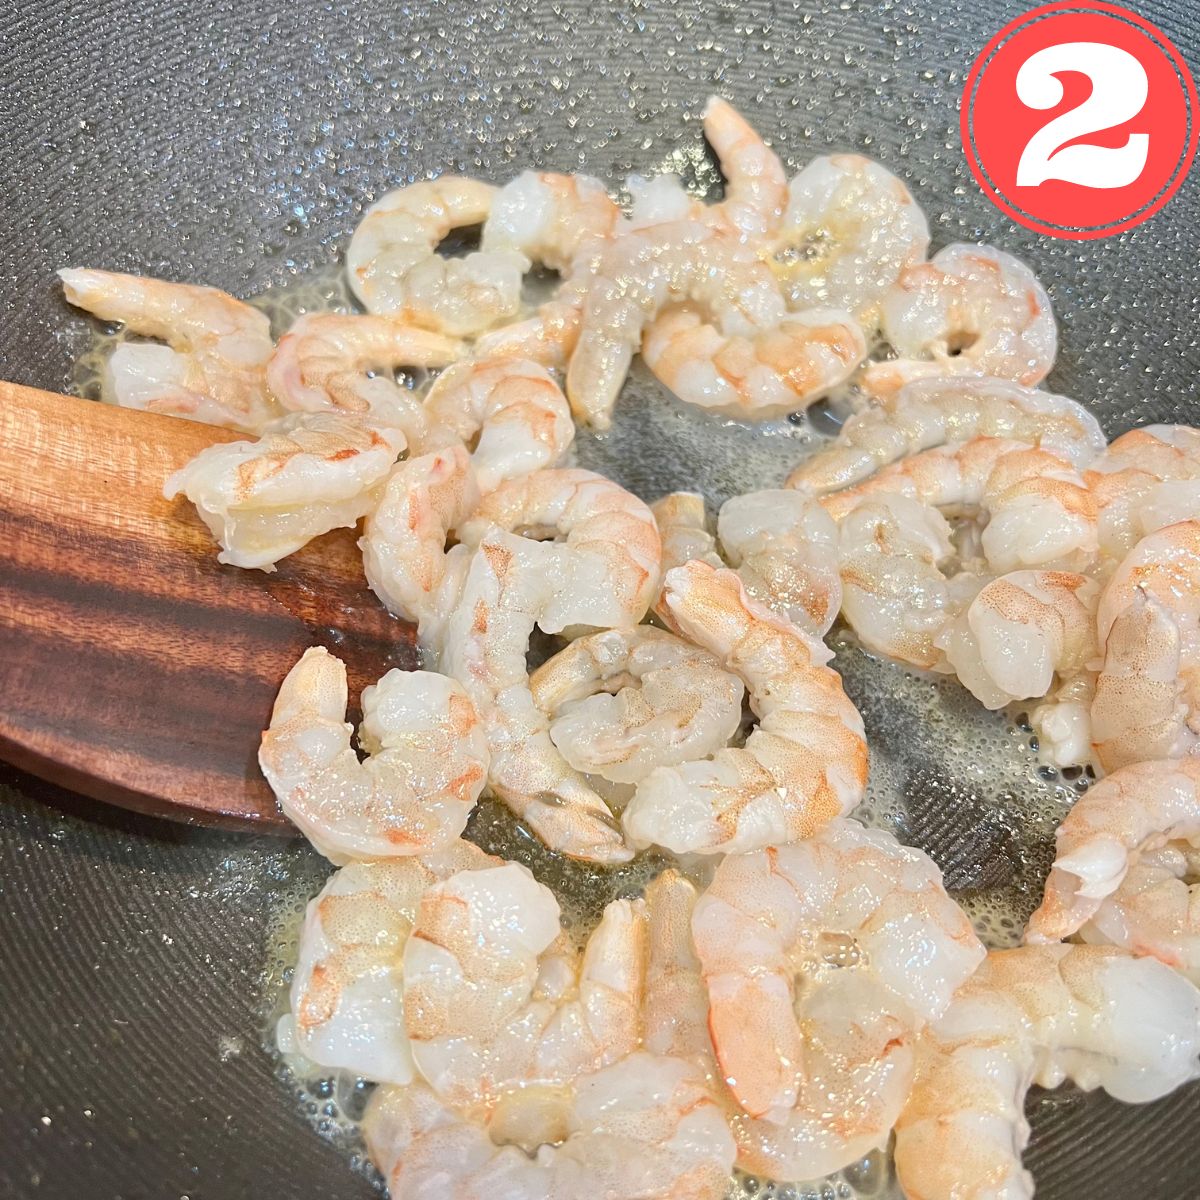 Shrimp in a wok with a wooden spoon